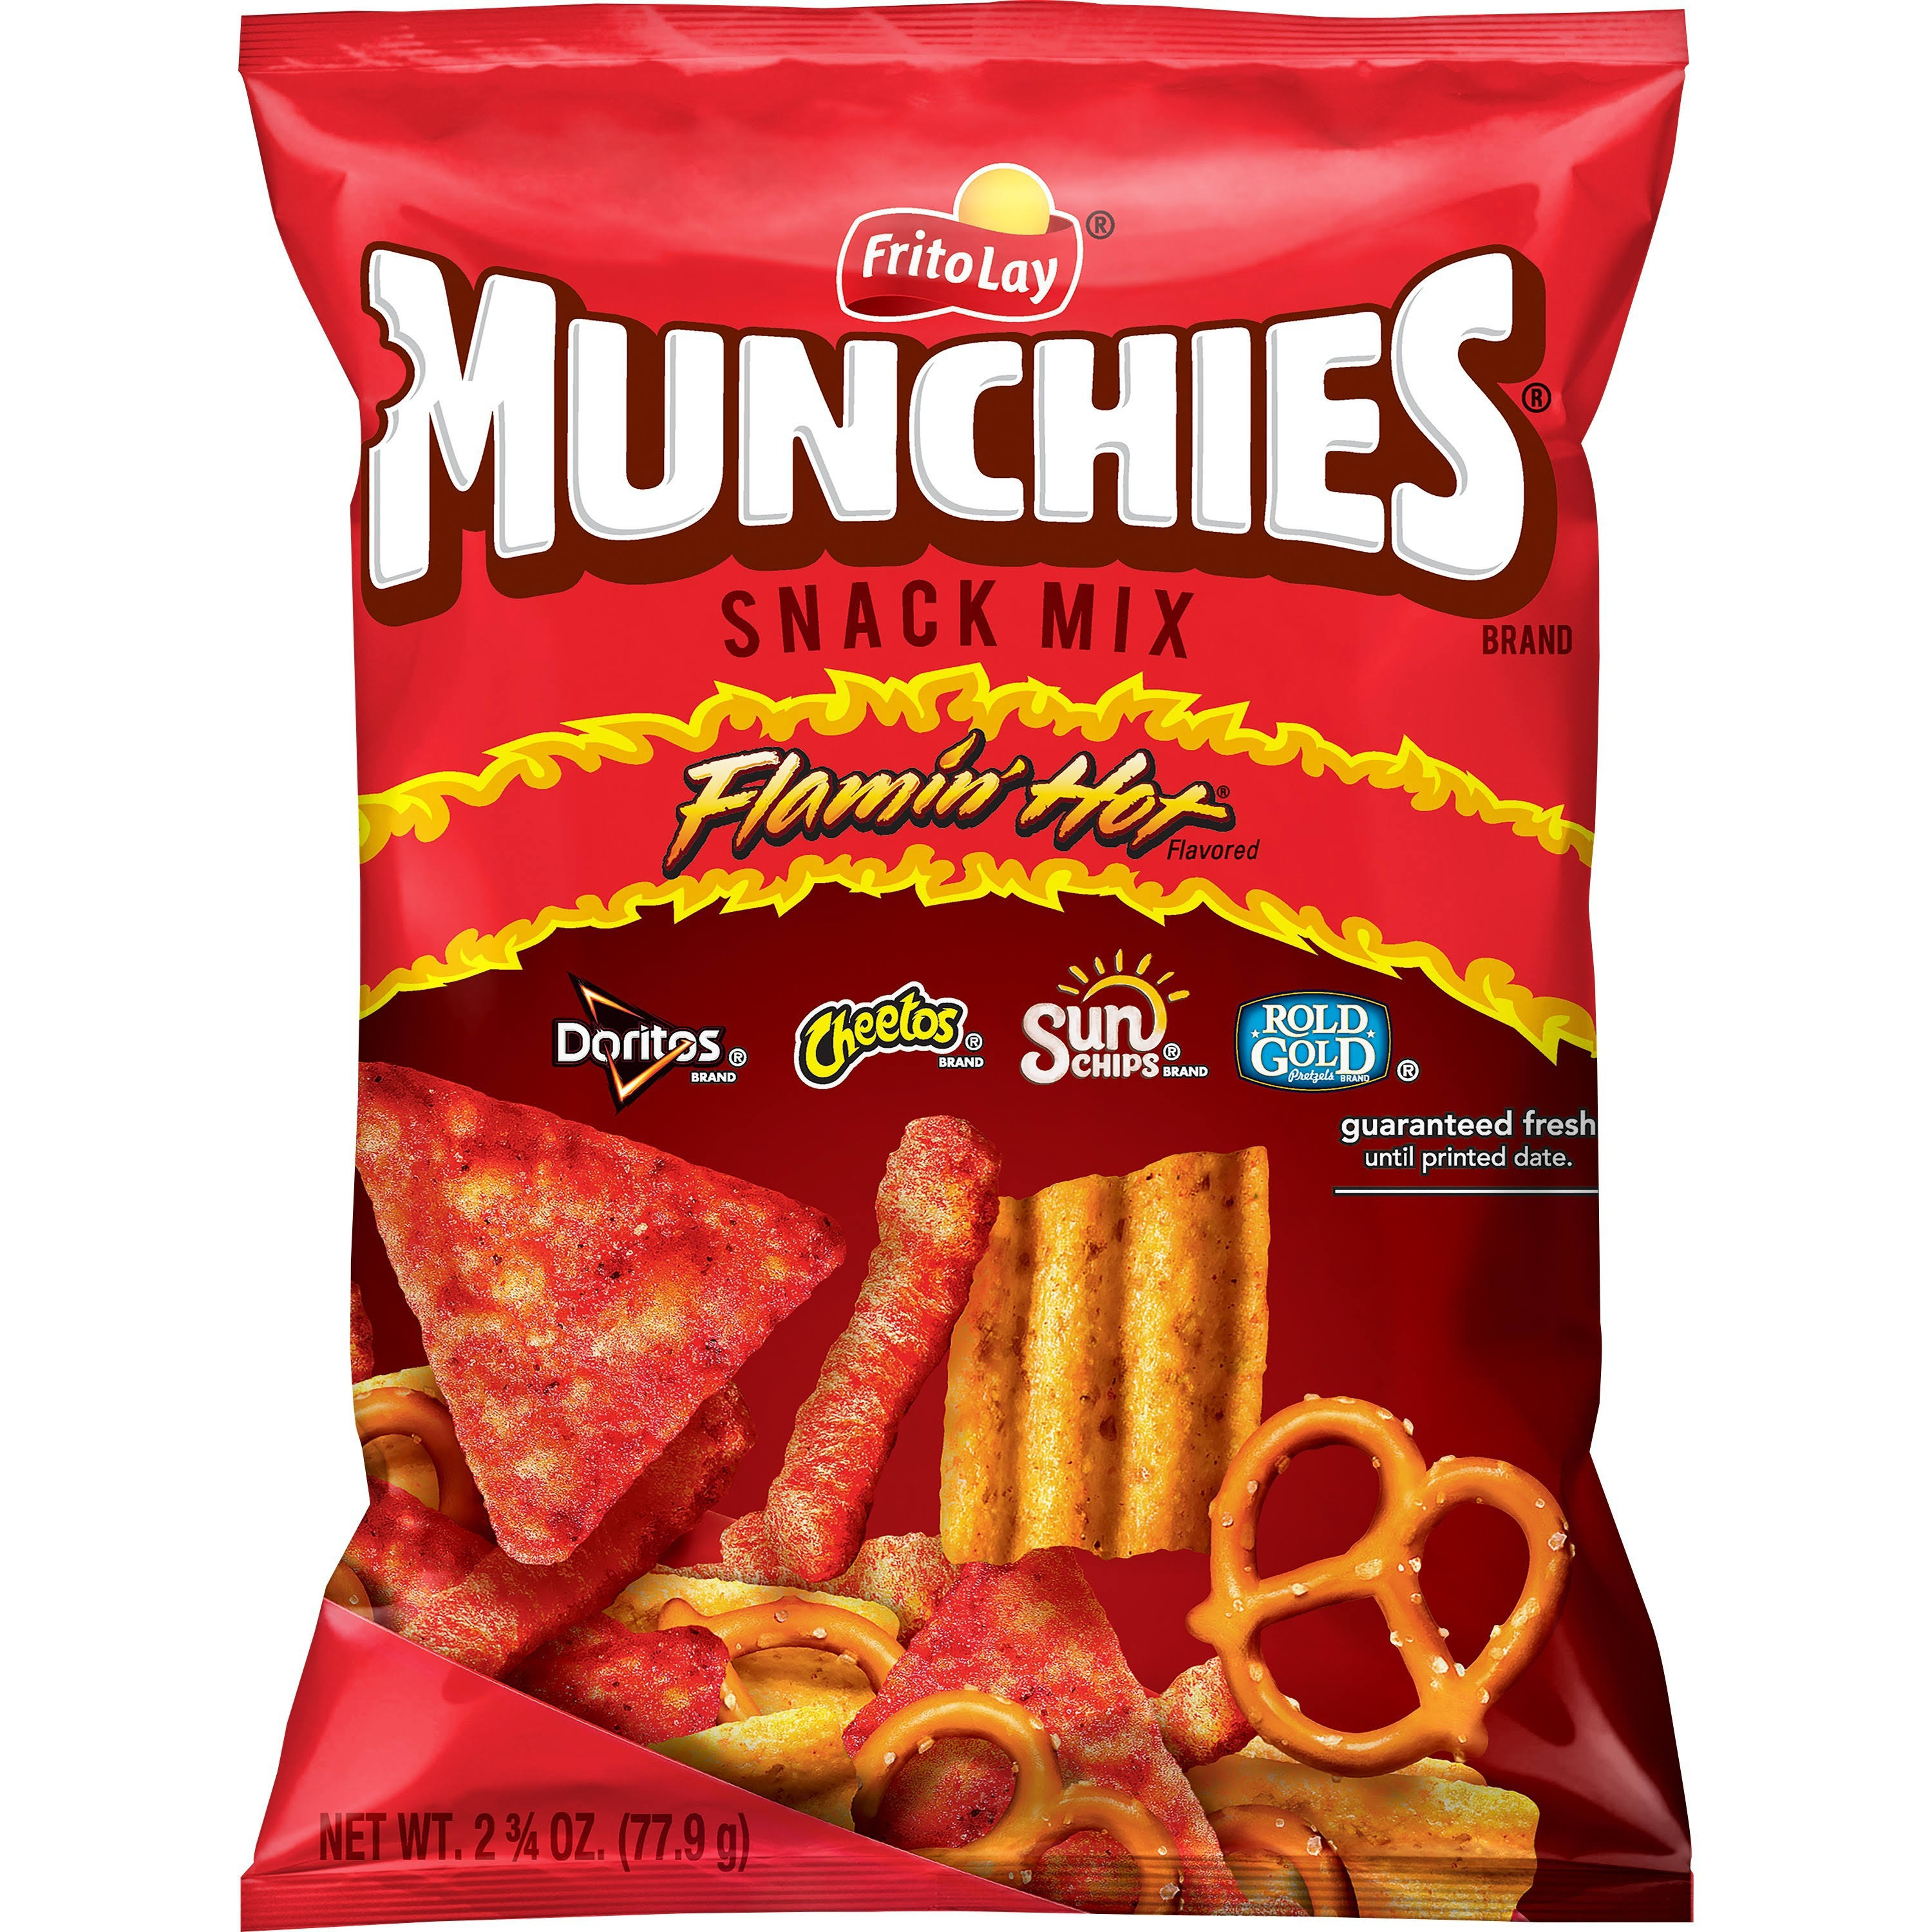 Munchies Snack Mix, Flamin' Hot Flavored - 2.75 oz